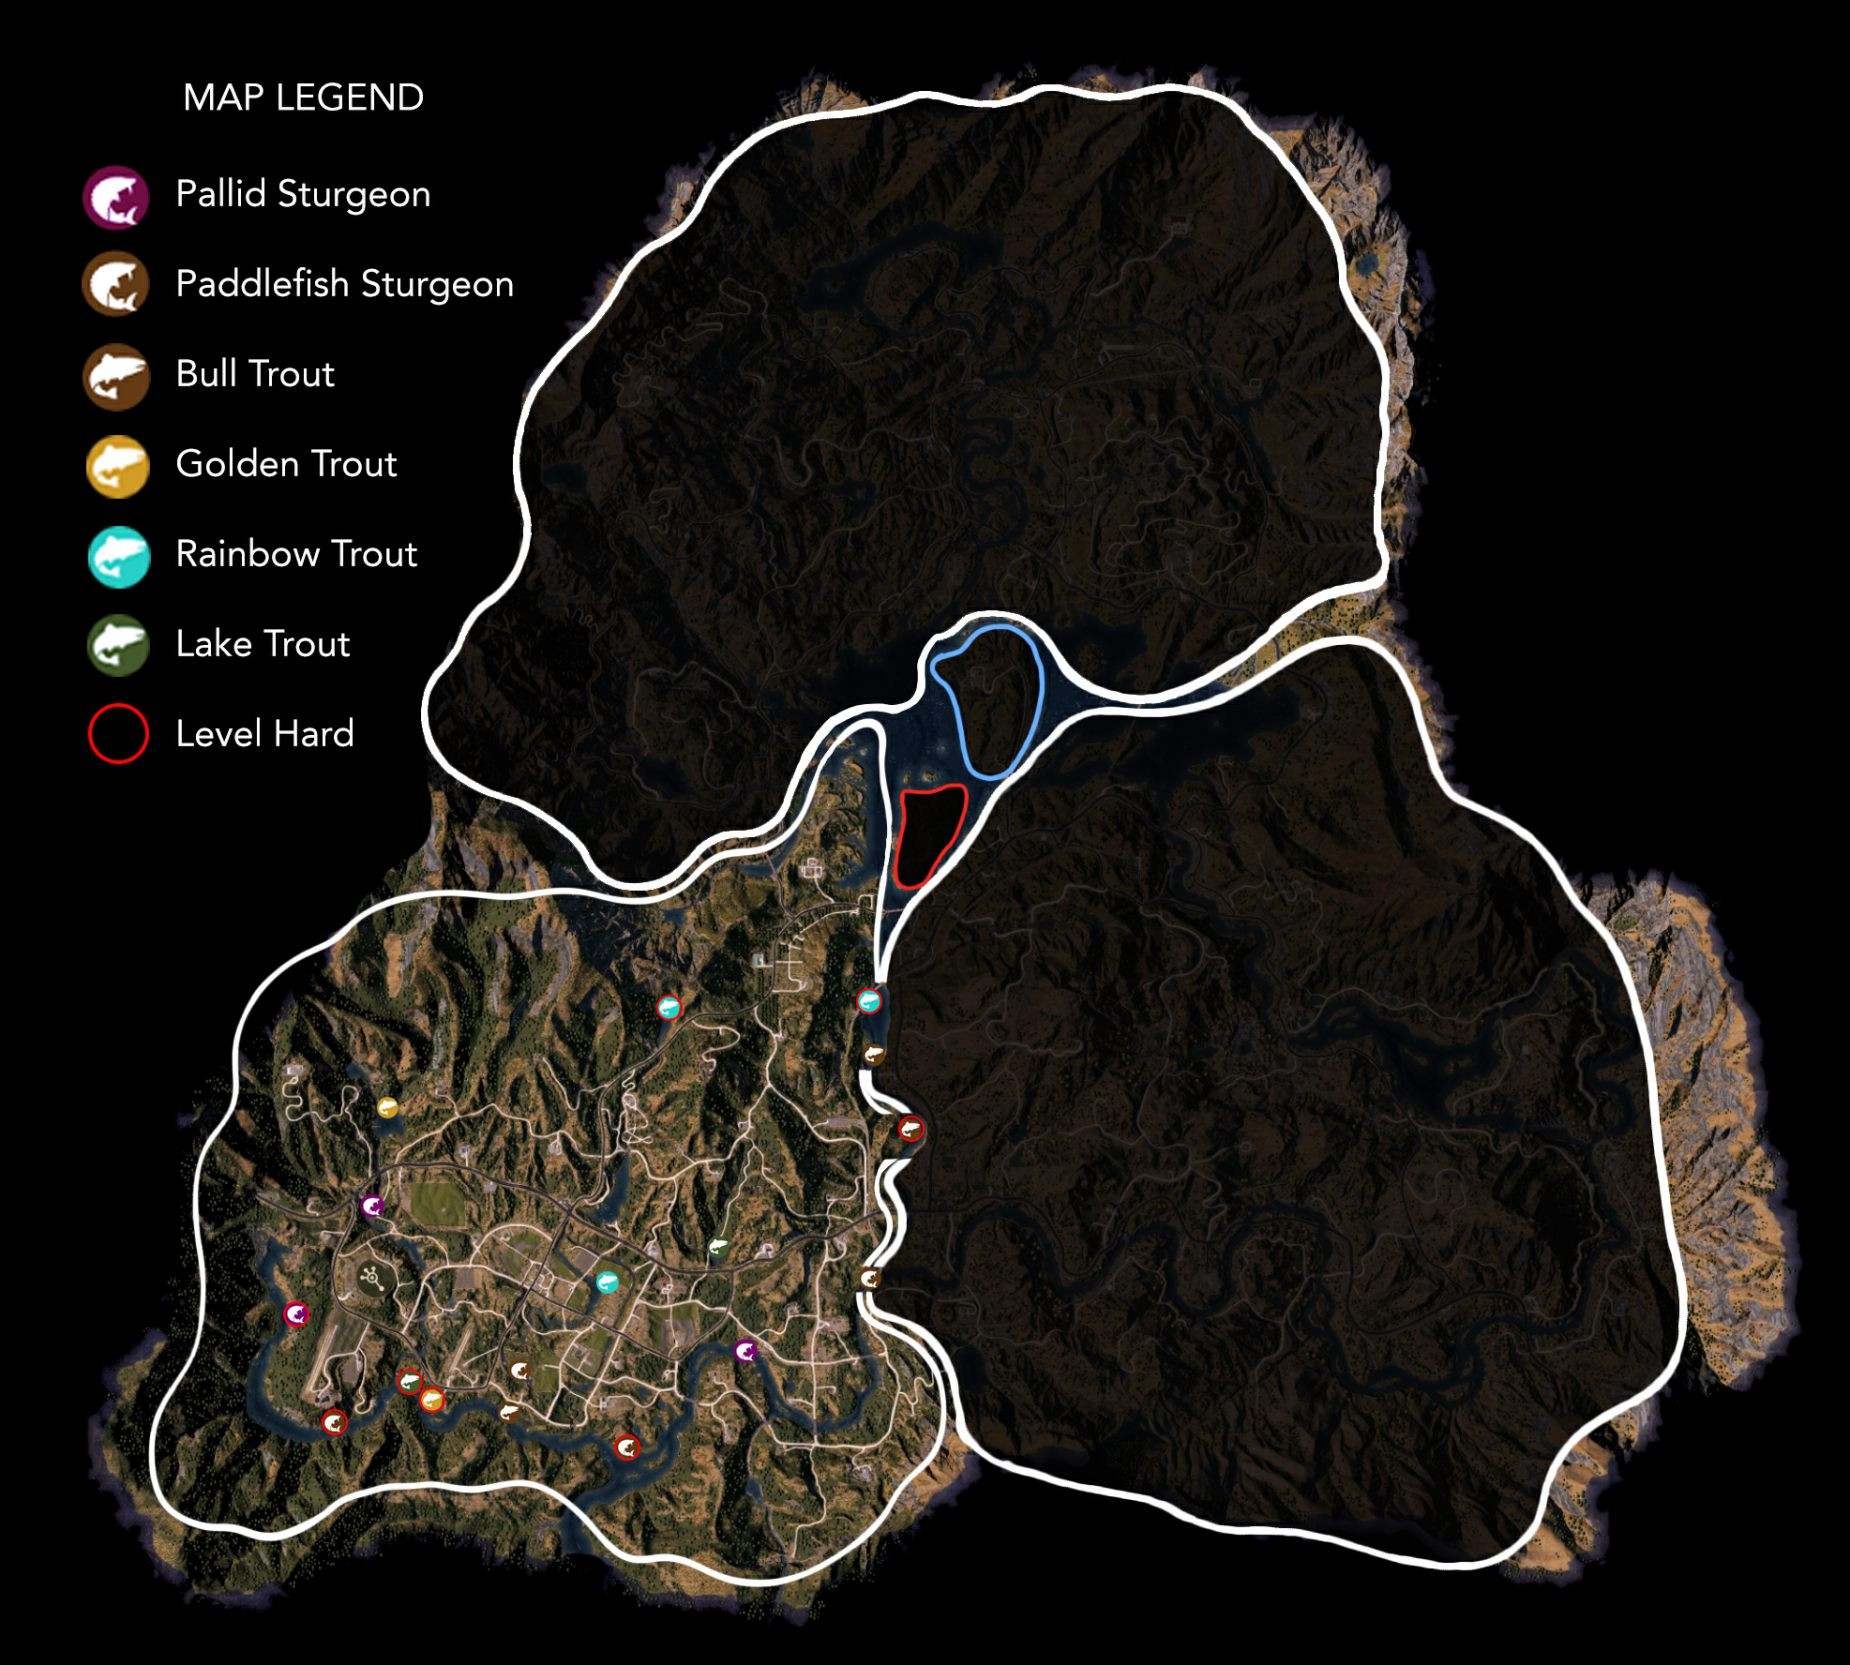 Far Cry 5 Printable Map Best Of Steam Munity Guide Far Cry 5 World Map & Locations